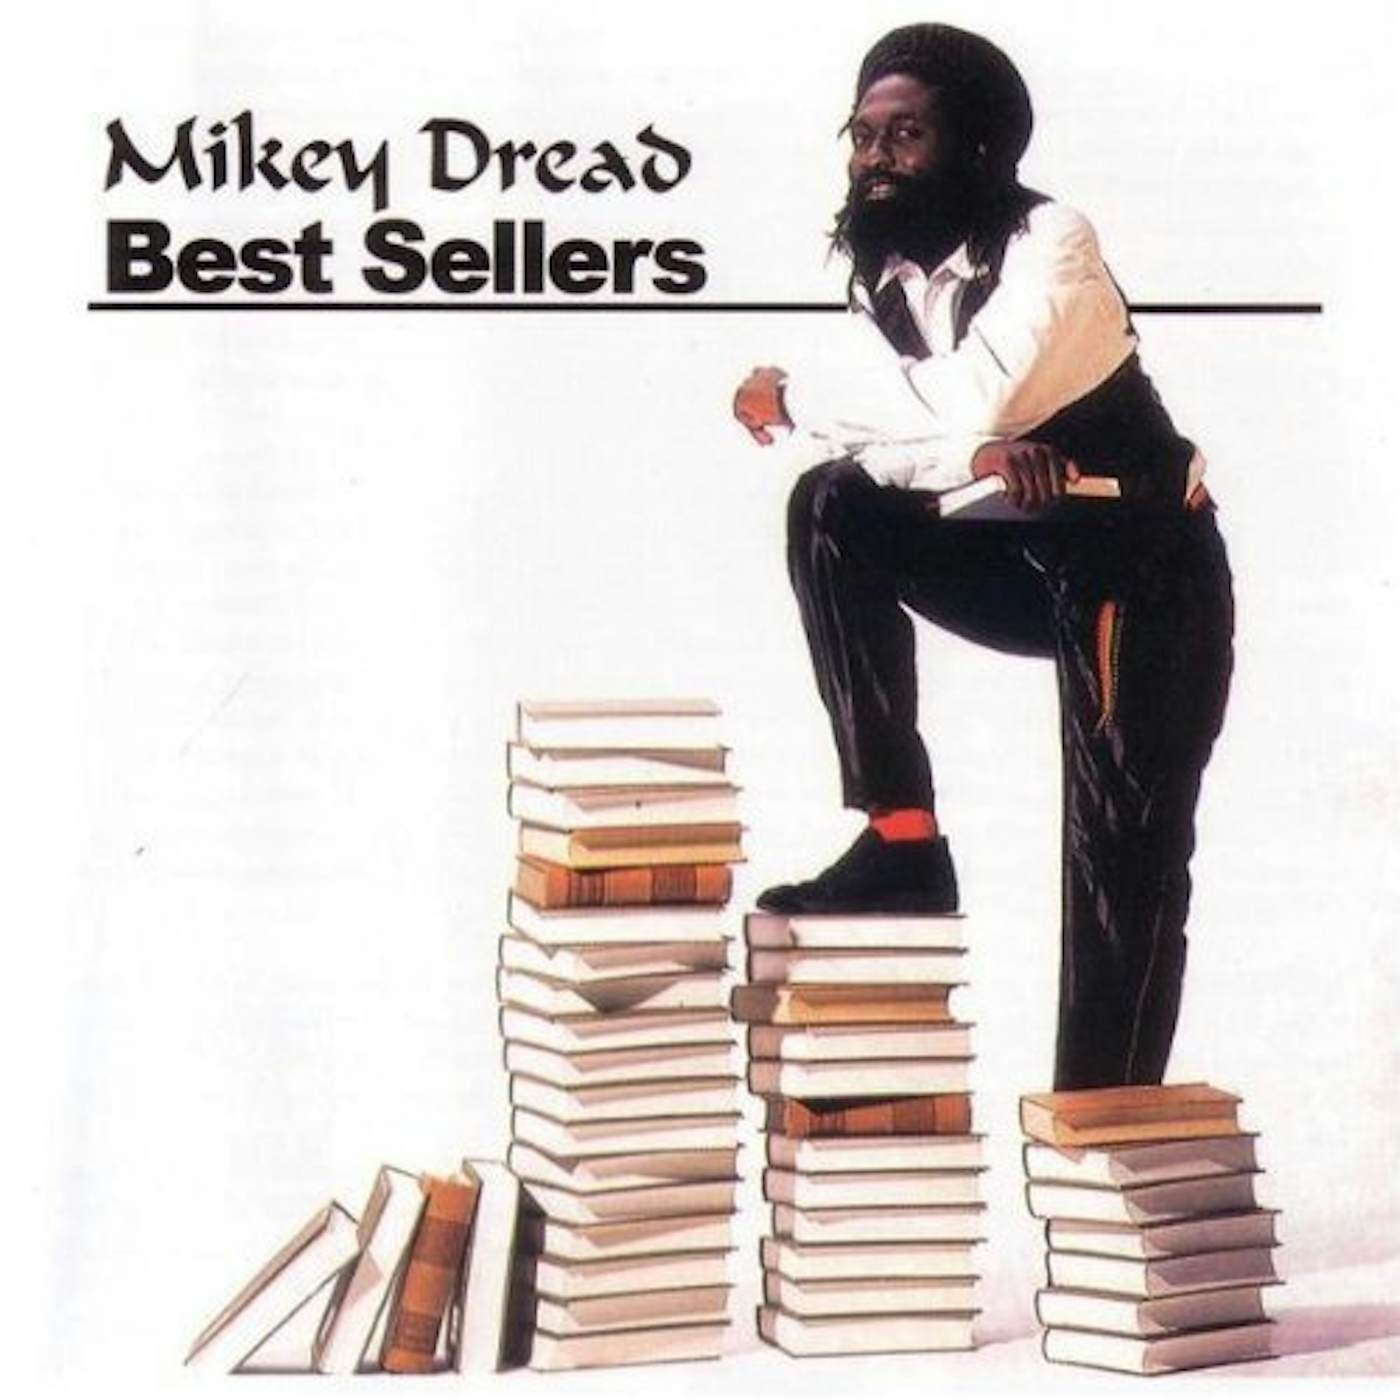 Mikey Dread BEST SELLERS CD